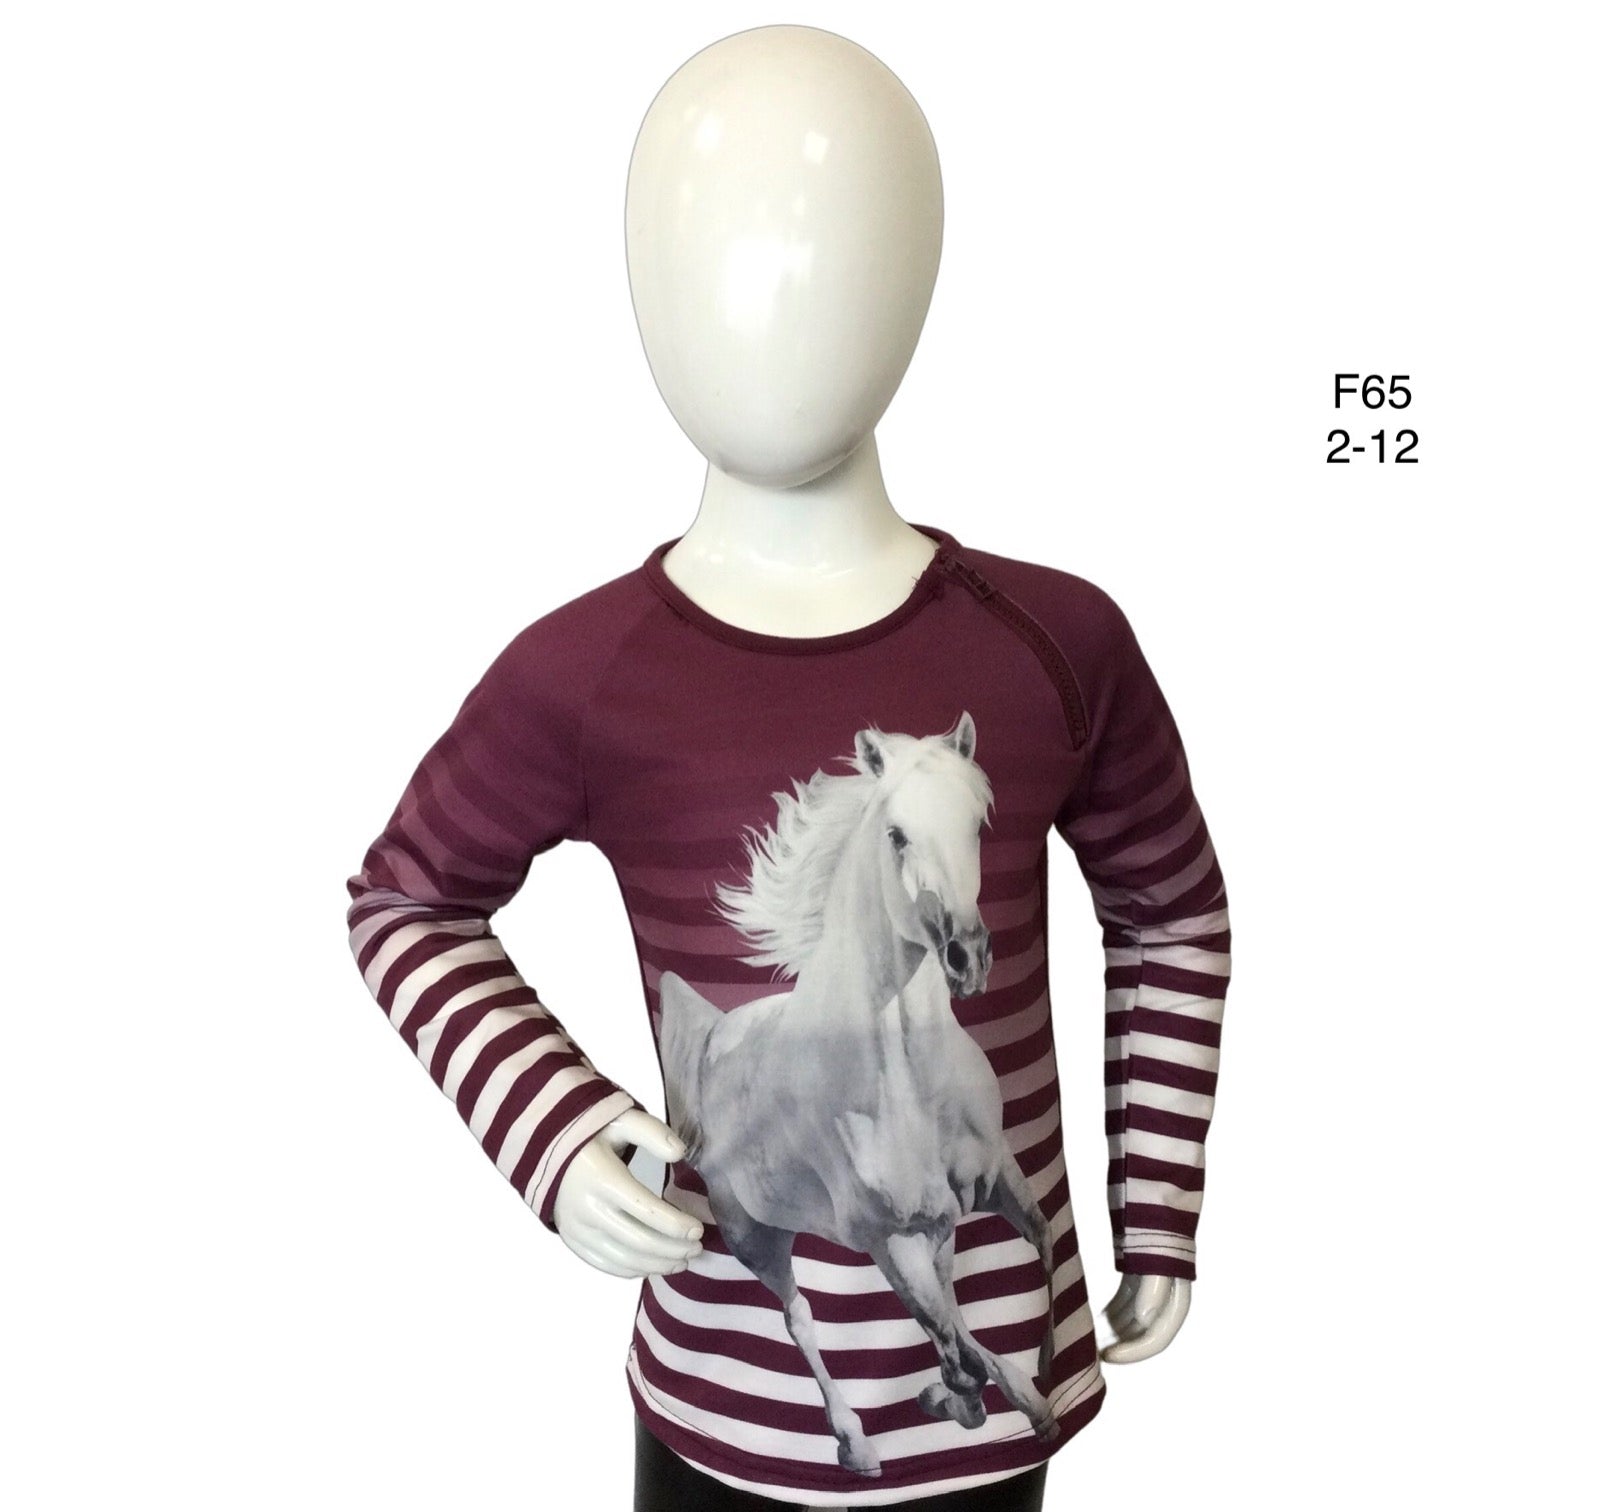 Longsleeve wine red with white horse with zipper